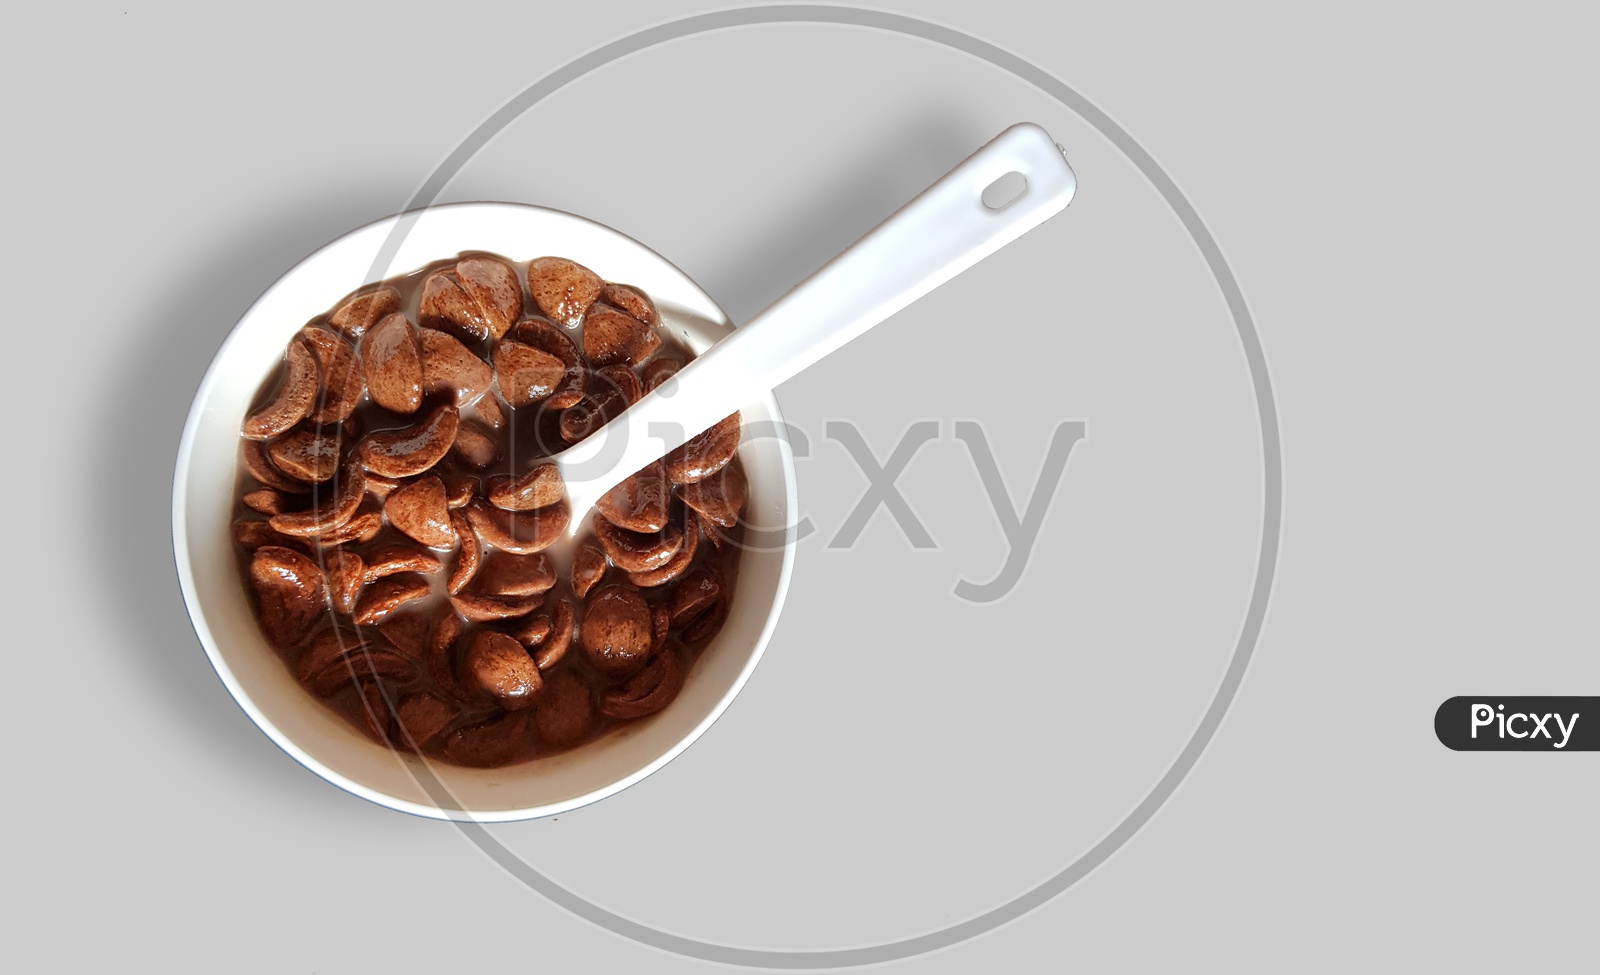 Chocolate Cornflakes Dipped In Chocolate Milk In A White Bowl In Light Background With Spoon